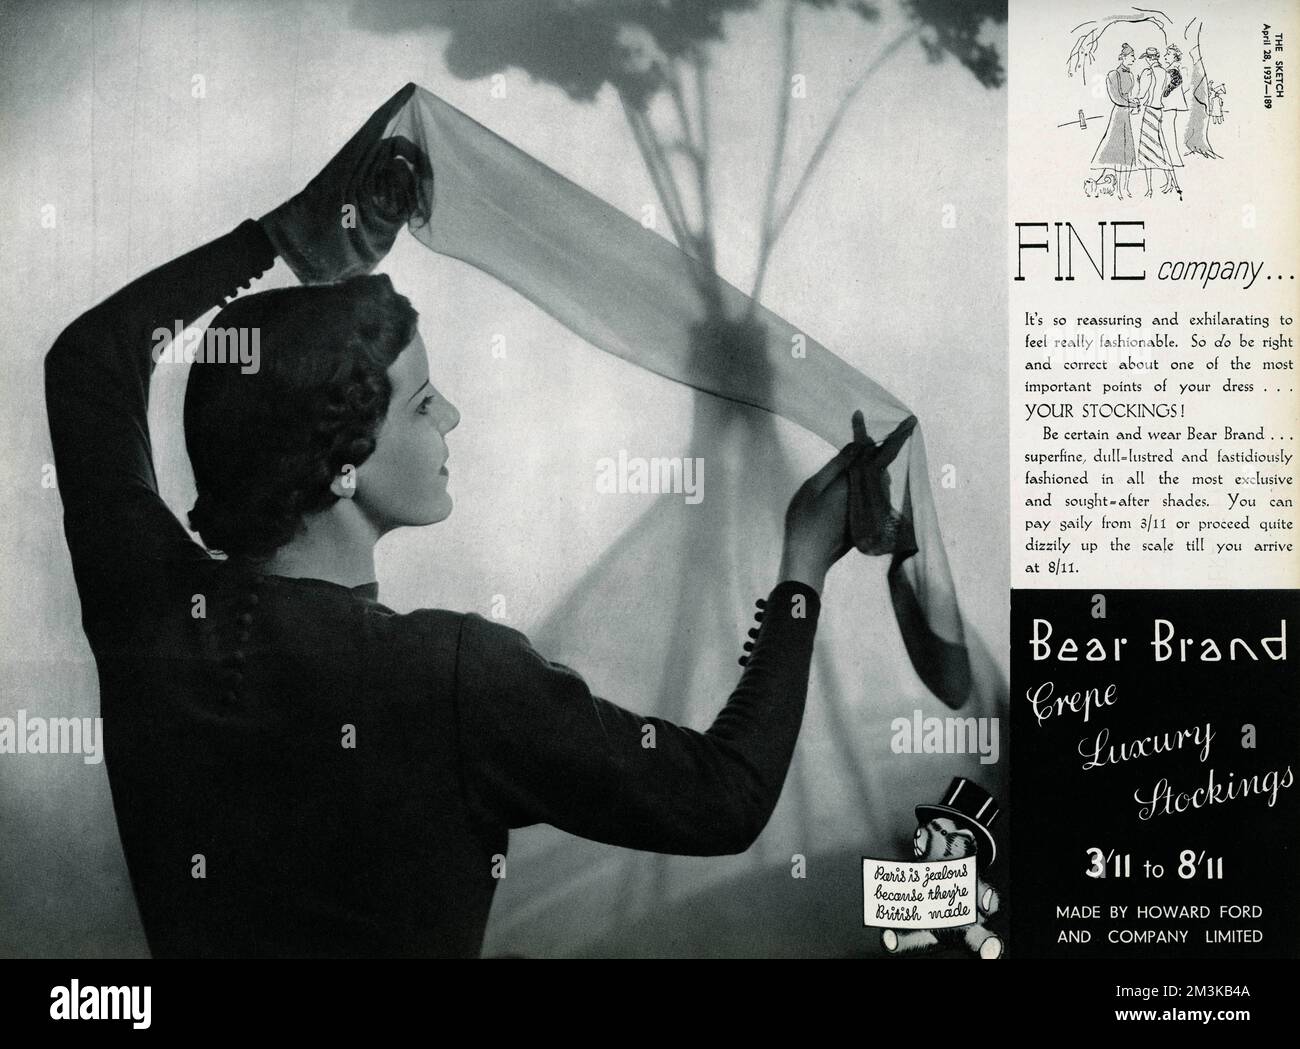 Bear Brand crepe luxury stockings.  Fine company. . . Be certain and wear Bear Brand. . . superfine, dull-lusted and fastidiously fashioned in all the most exclusive and sought after shades.  1937 Stock Photo